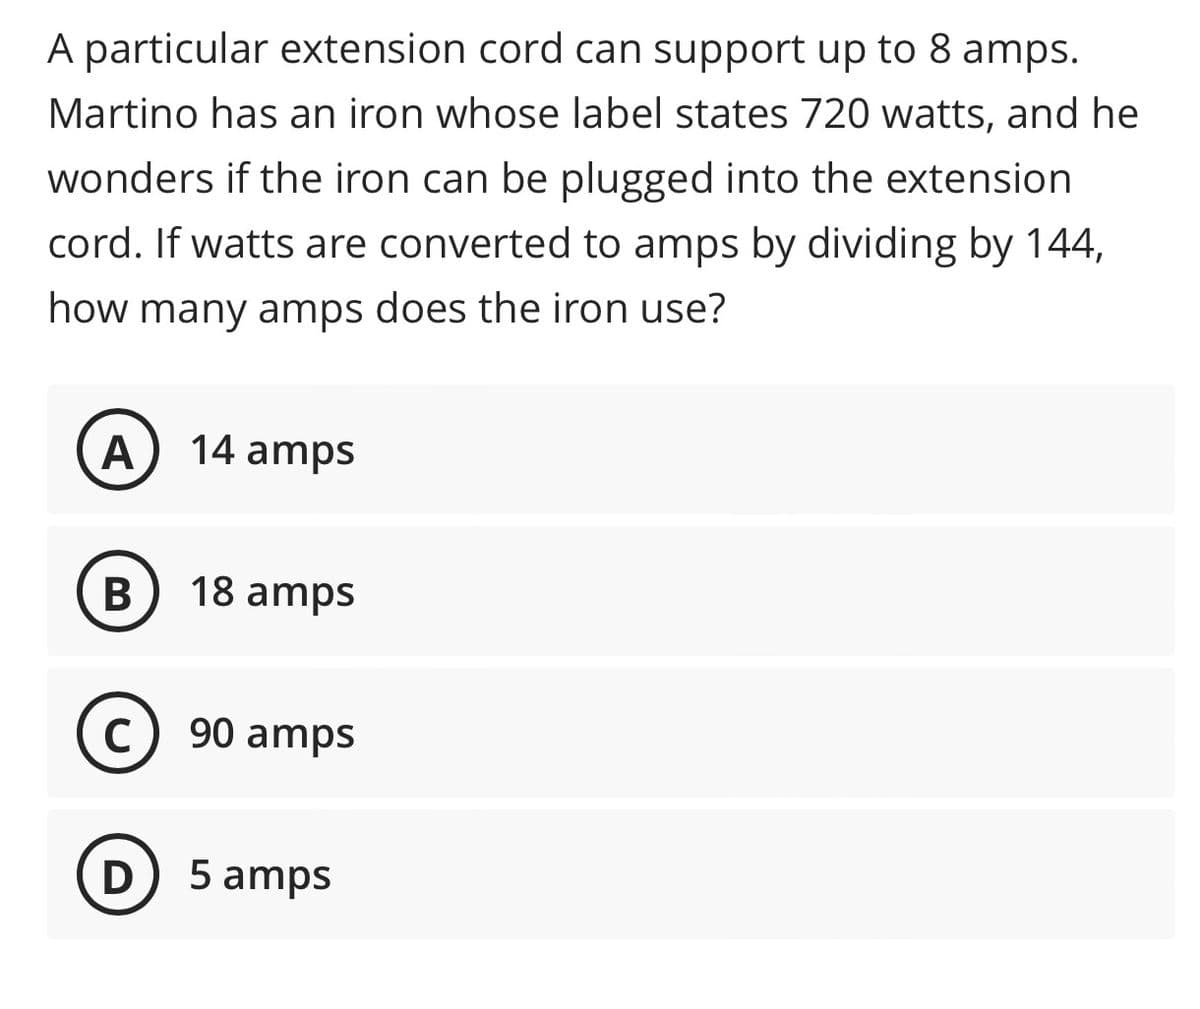 A particular extension cord can support up to 8 amps.
Martino has an iron whose label states 720 watts, and he
wonders if the iron can be plugged into the extension
cord. If watts are converted to amps by dividing by 144,
how many amps does the iron use?
A
14 amps
B
18 amps
C
90 amps
D
5 amps